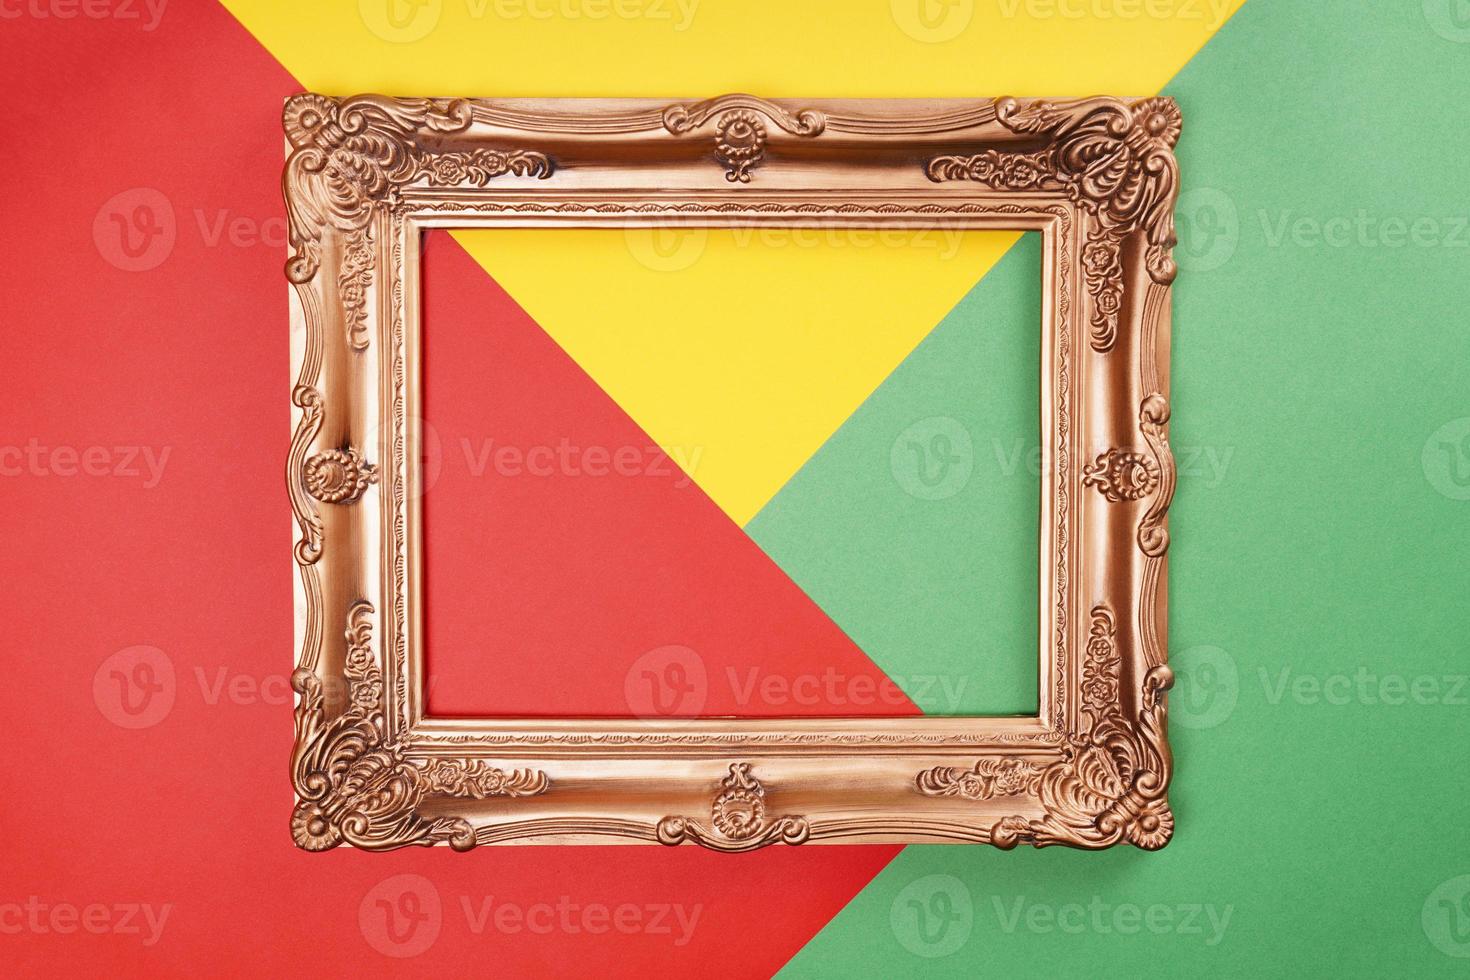 empty gold frame on color paper background in red green and yellow photo